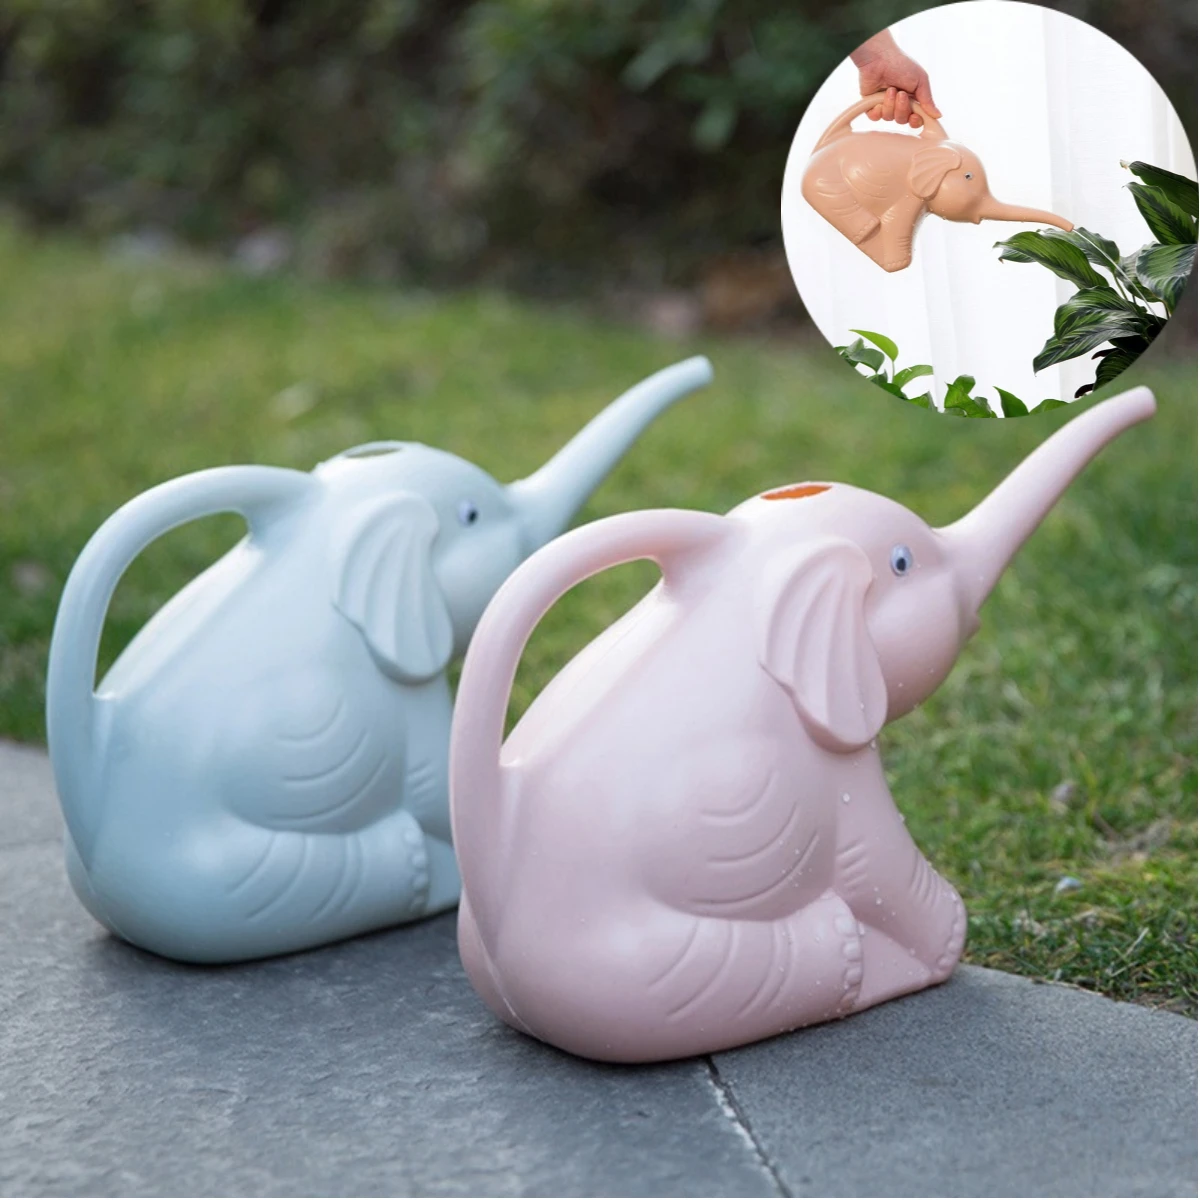 1pc Elephant Shape Watering Can Home Garden Flowers Tool Succulents Potted Gardening Water Bottle Plant Watering Pot 30x18x12cm